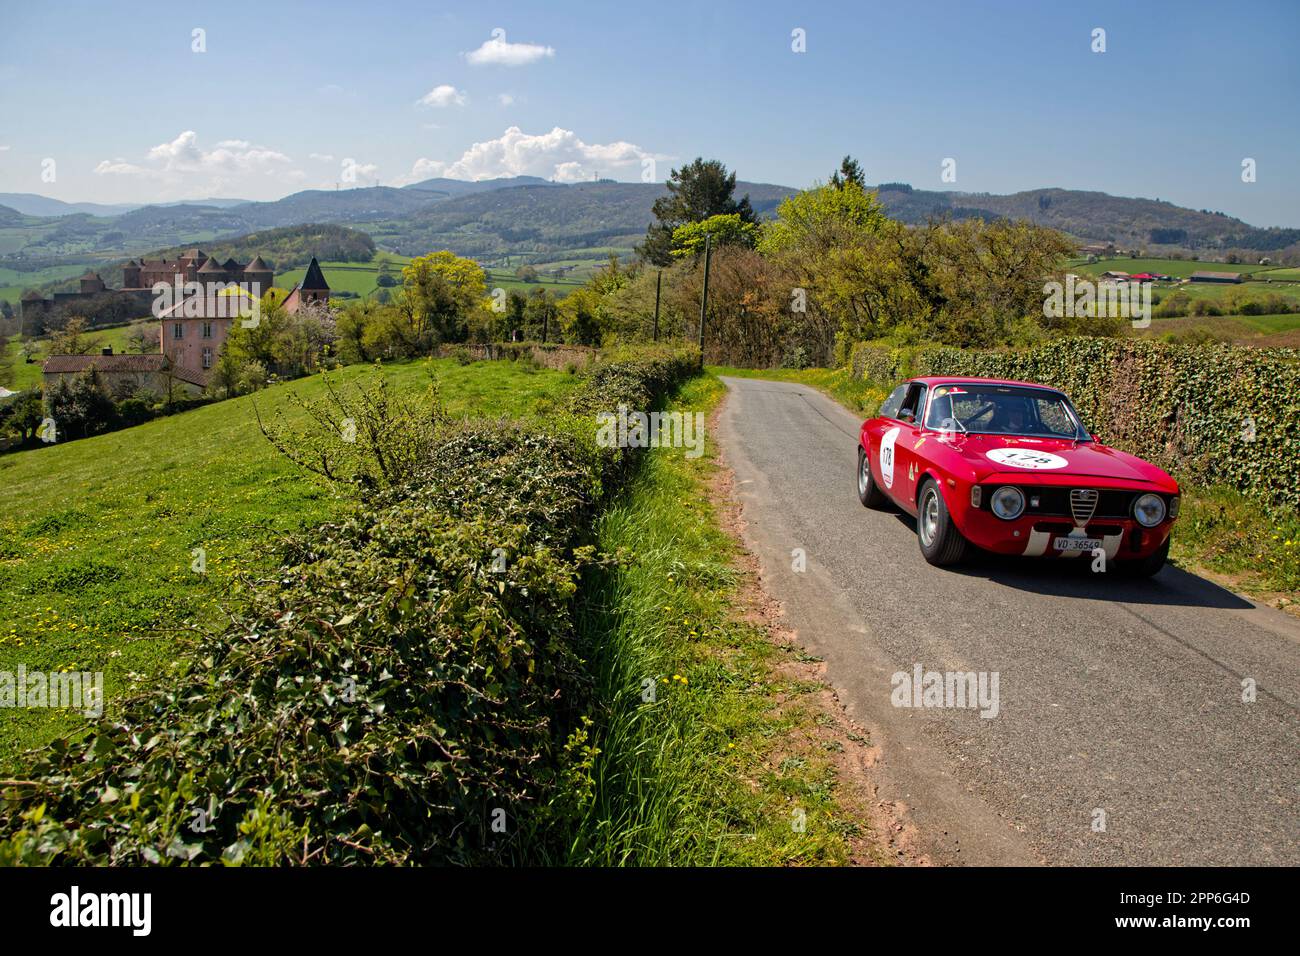 BERZE, FRANCE, April 19, 2023 : From April 17 to 22, 32nd Tour Auto runs old cars from Paris to the French Riviera. Tour Auto is the continuation of a Stock Photo